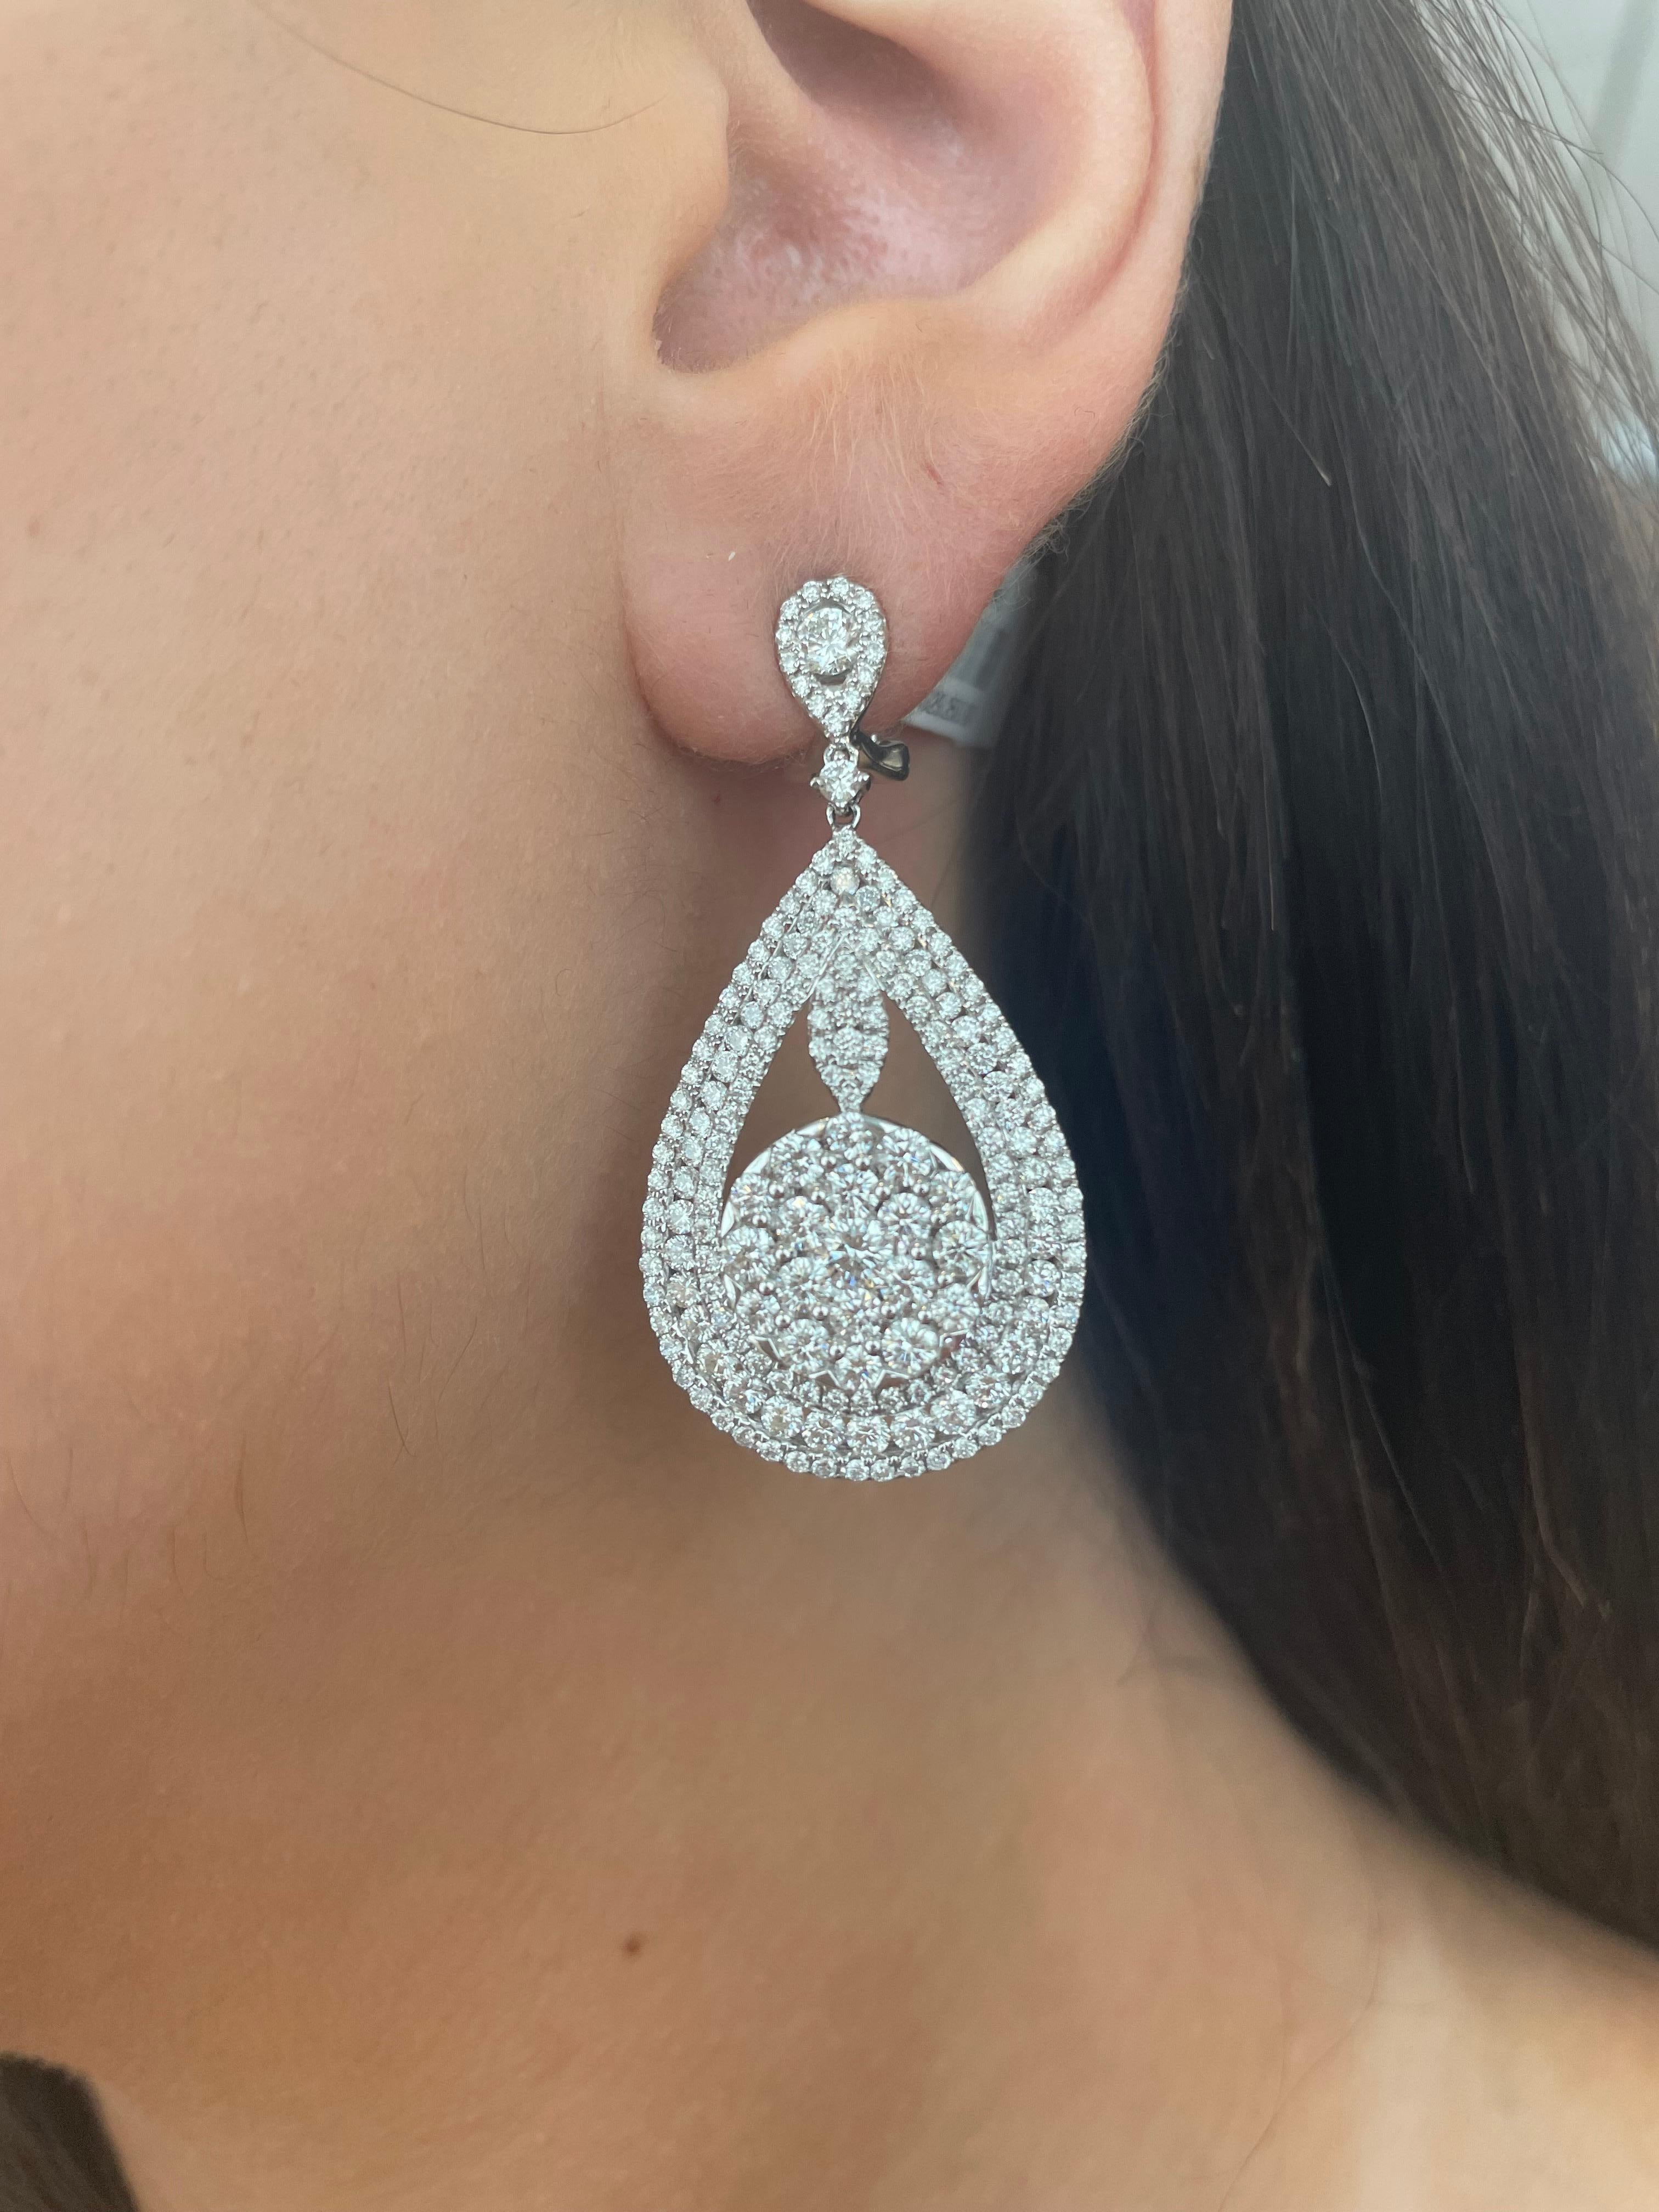 Stunning pave diamond drop earrings.
372 round brilliant diamonds, 5.74 carats total. Approximately G/H color grade and VS2/SI1 clarity grade. Pave and bezel set, 18k white gold.
Accommodated with an up to date appraisal by a GIA G.G. upon request.